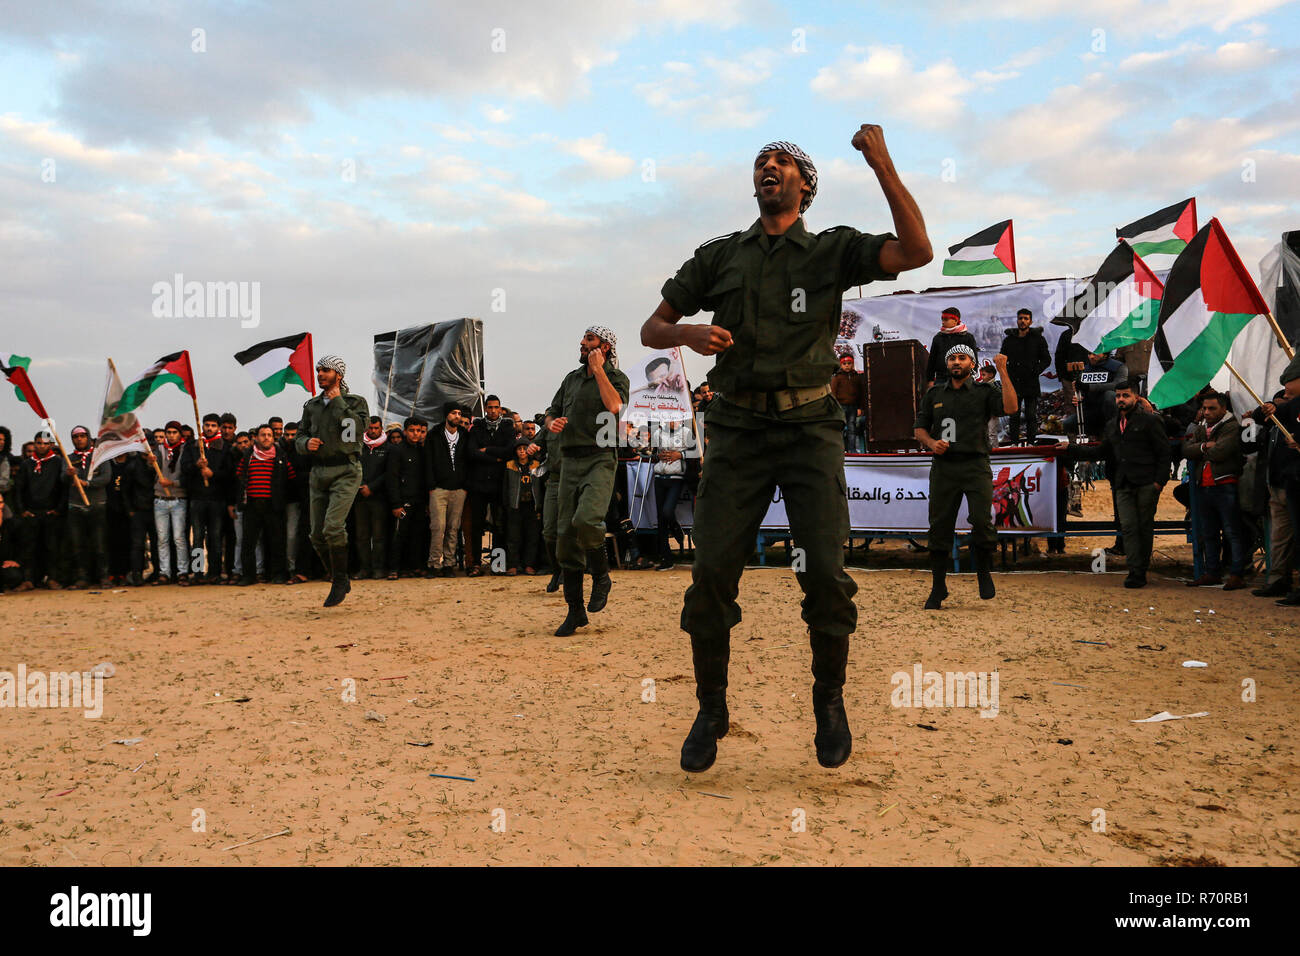 Gaza, Palestine. 7th December 2018.Palestinian protesters gather during clashes with Israeli troops in tents protest where Palestinians demand the right to return to their homeland at the Israel-Gaza border, in the east of Rafah in the southern Gaza Strip, on December 7, 2018. Credit: Awakening Photo Agency/Alamy Live News Stock Photo